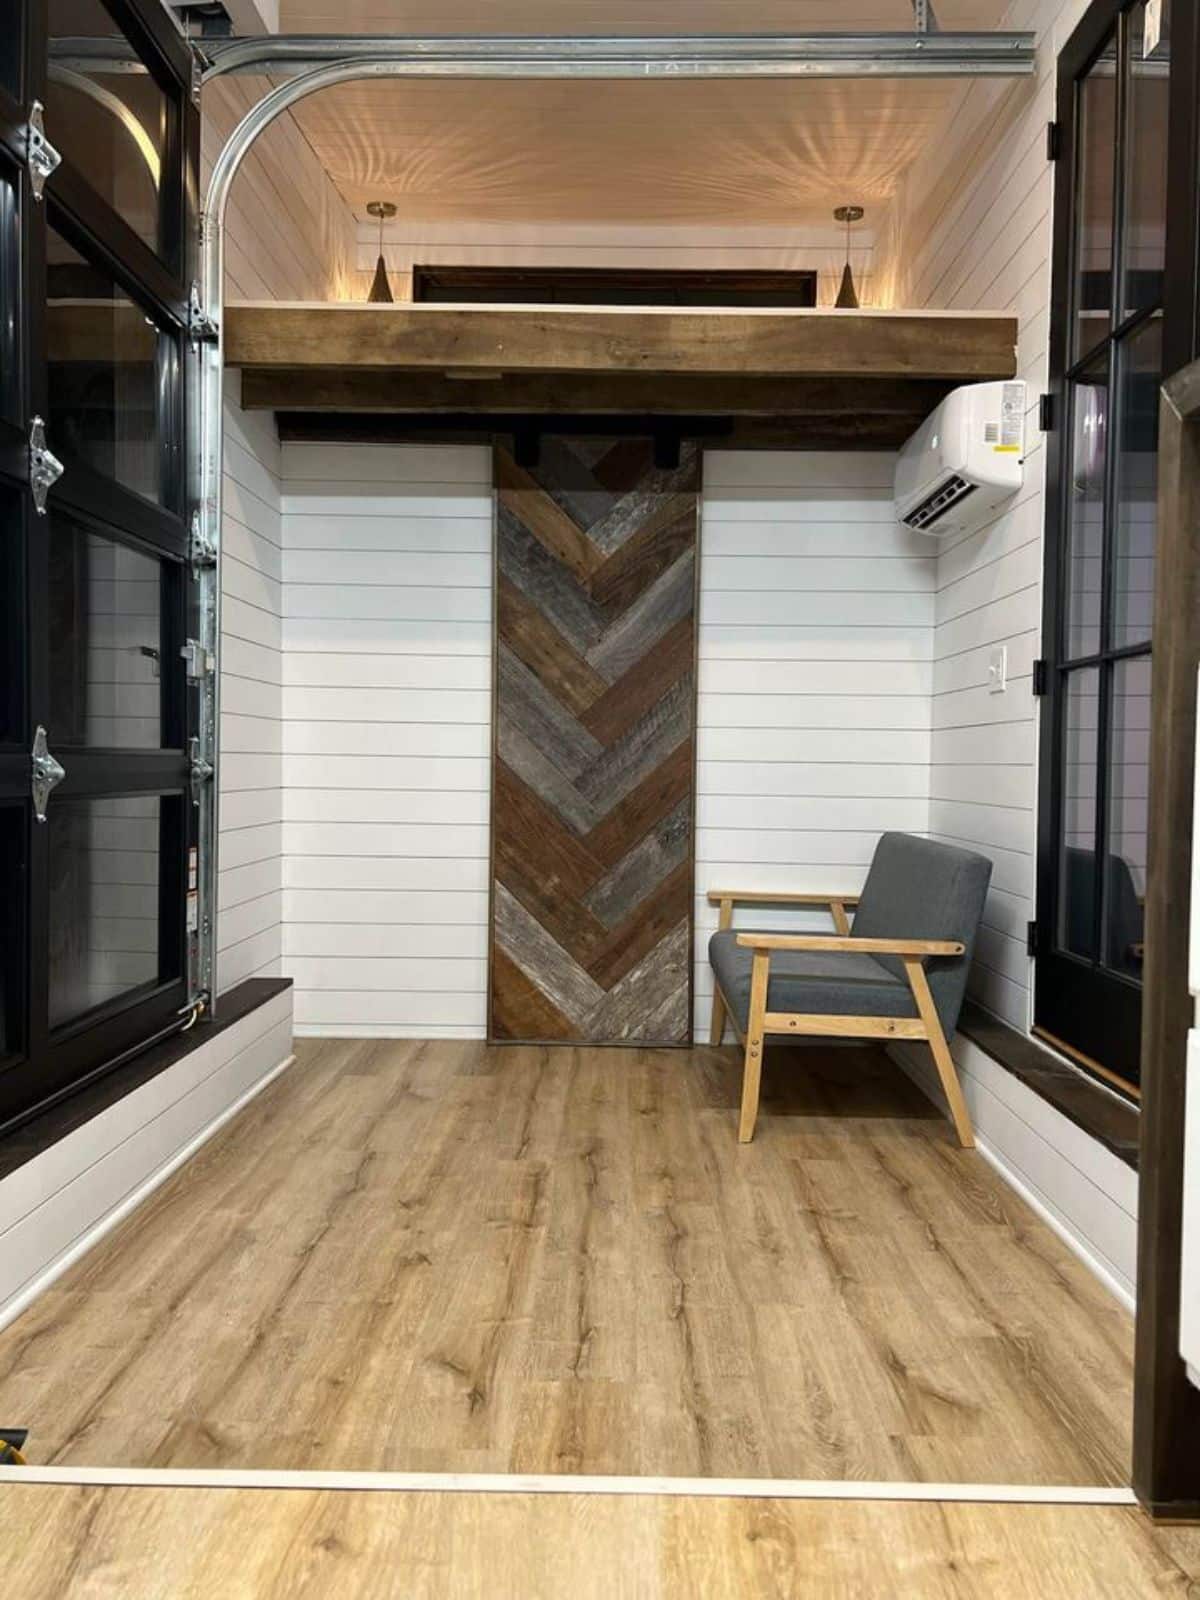 Living area of 22’ Luxury Tiny House has an air condition unit also